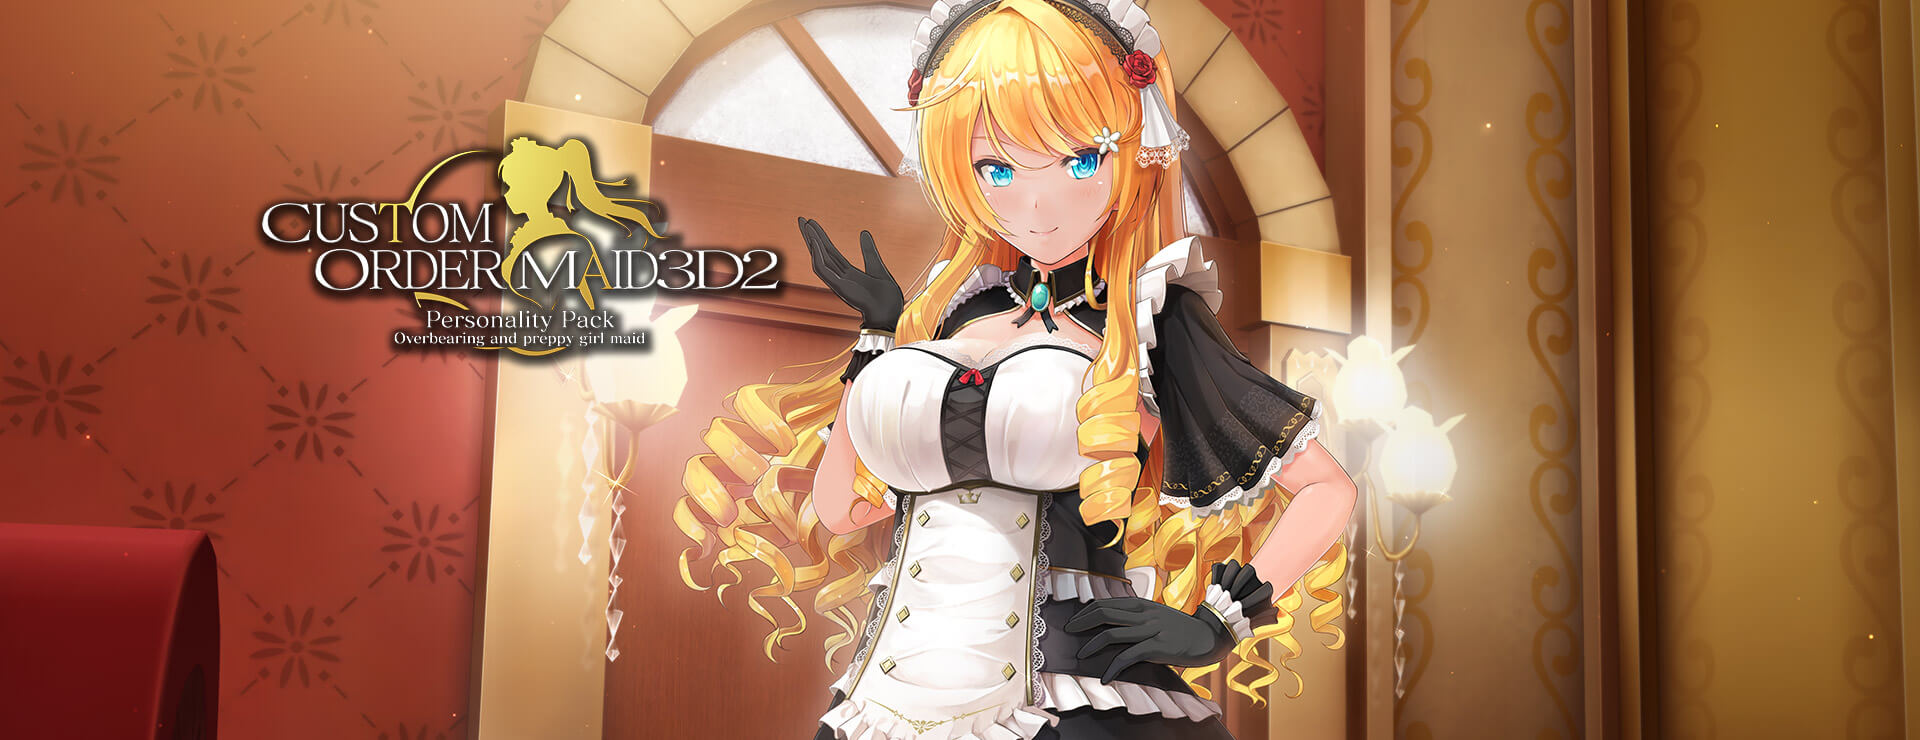 Custom Order Maid 3D2: Overbearing and Preppy Girl Maid DLC - Simulation Spiel